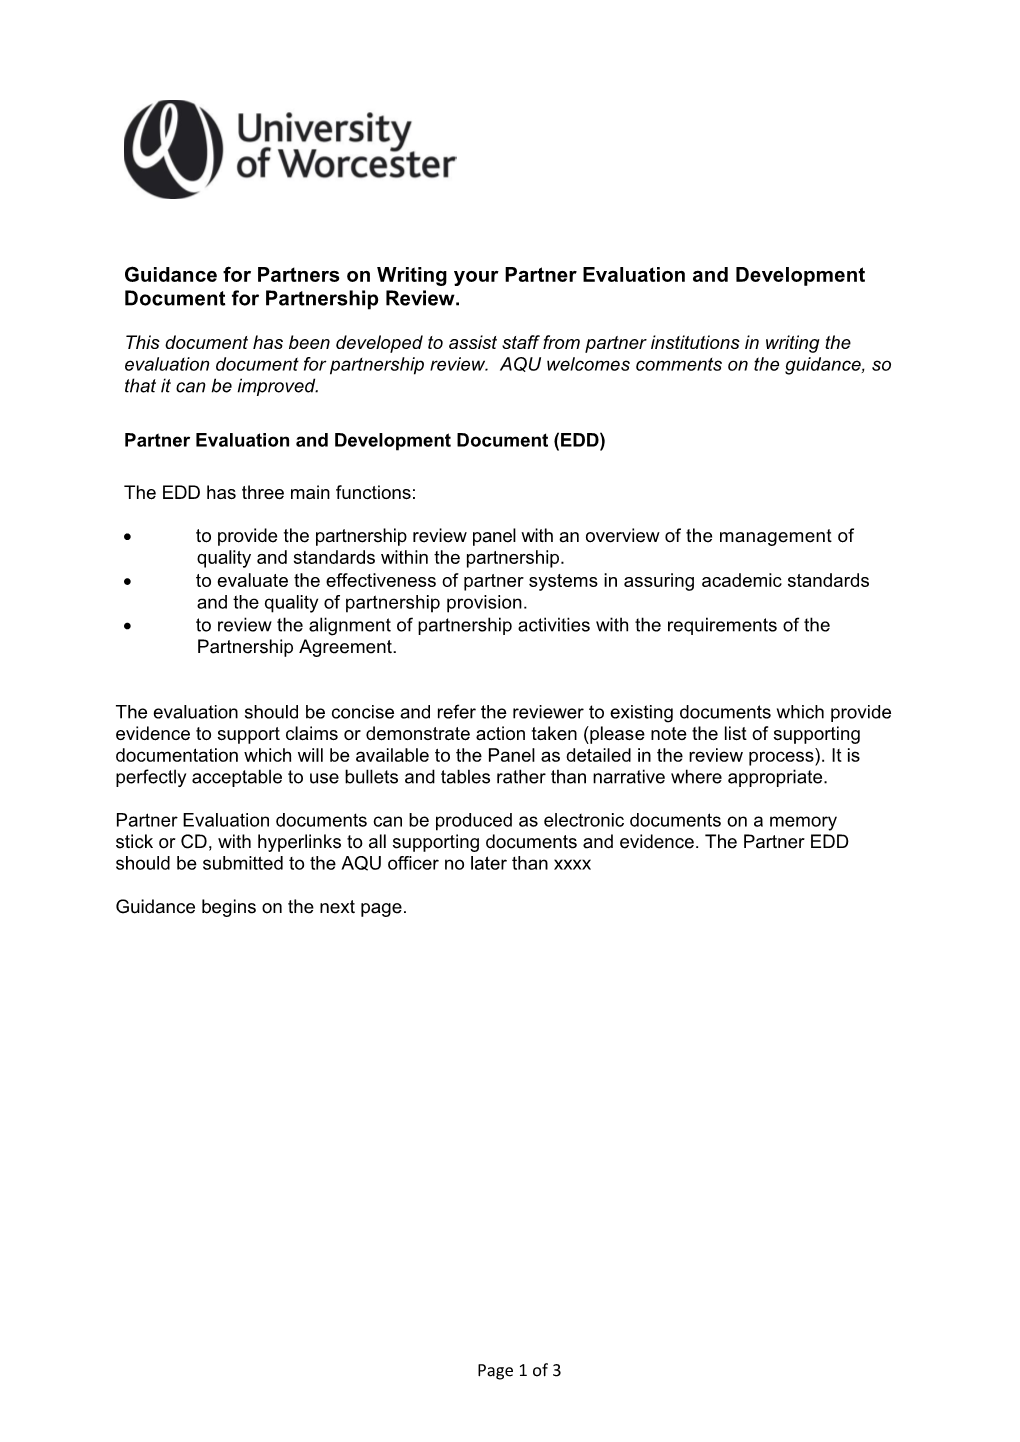 Guidance for Partnerson Writingyourpartner Evaluation and Development Document for Partnership